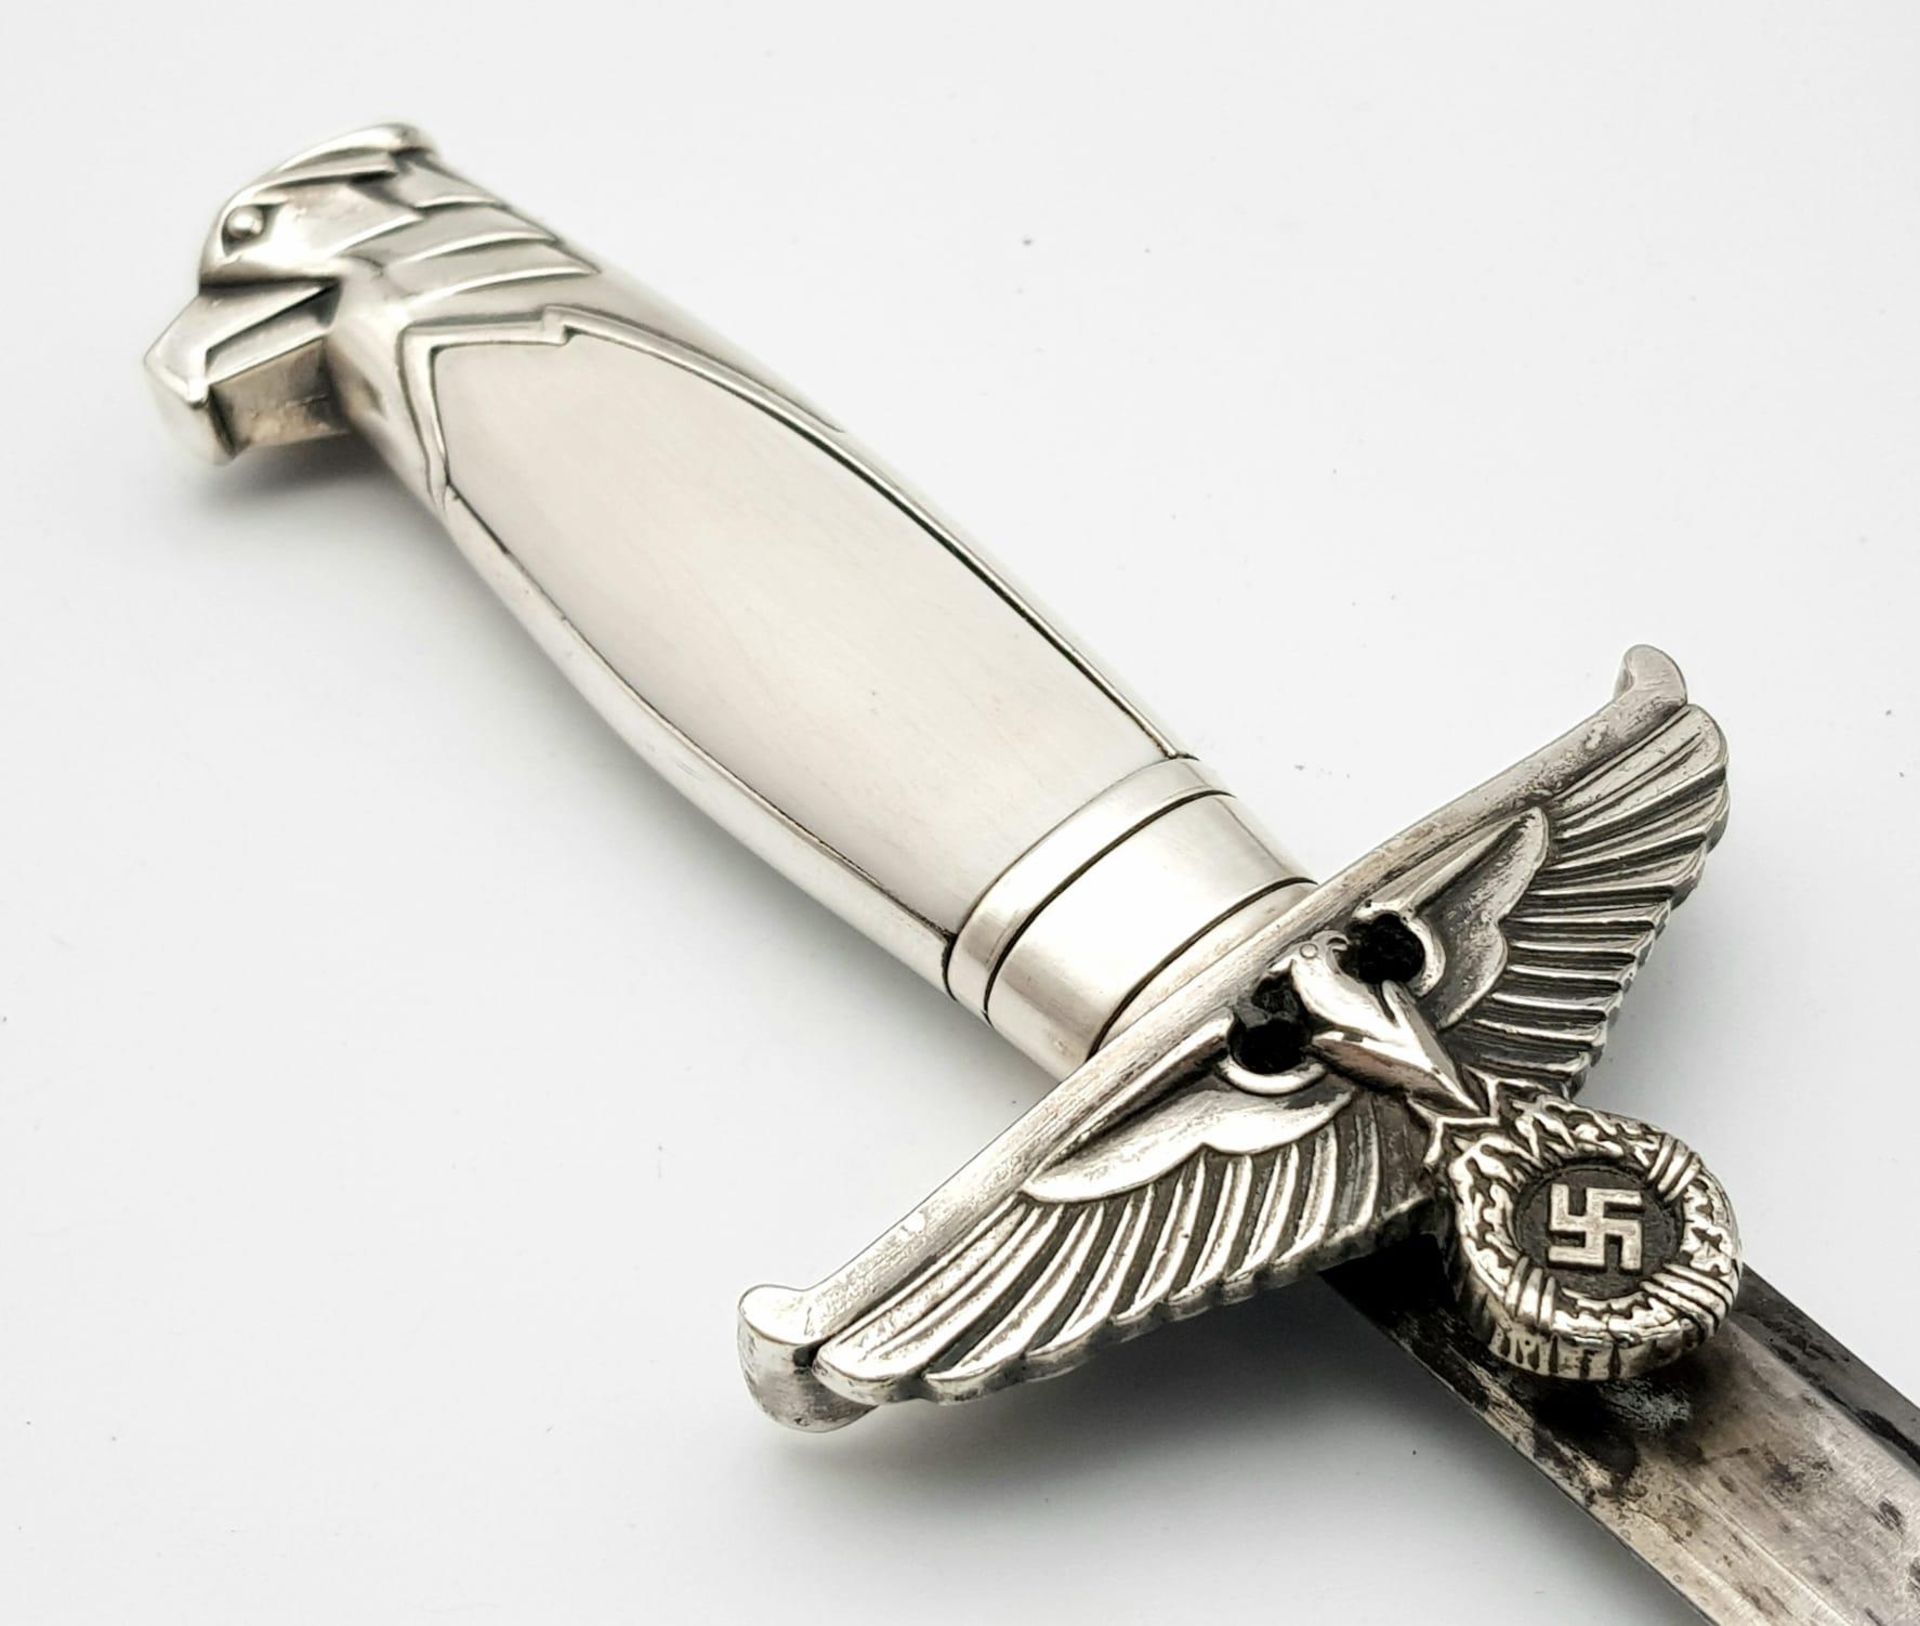 A WW2 German Diplomats Dagger - these stylish daggers had fake mother of pearl handles. This is a - Bild 3 aus 7